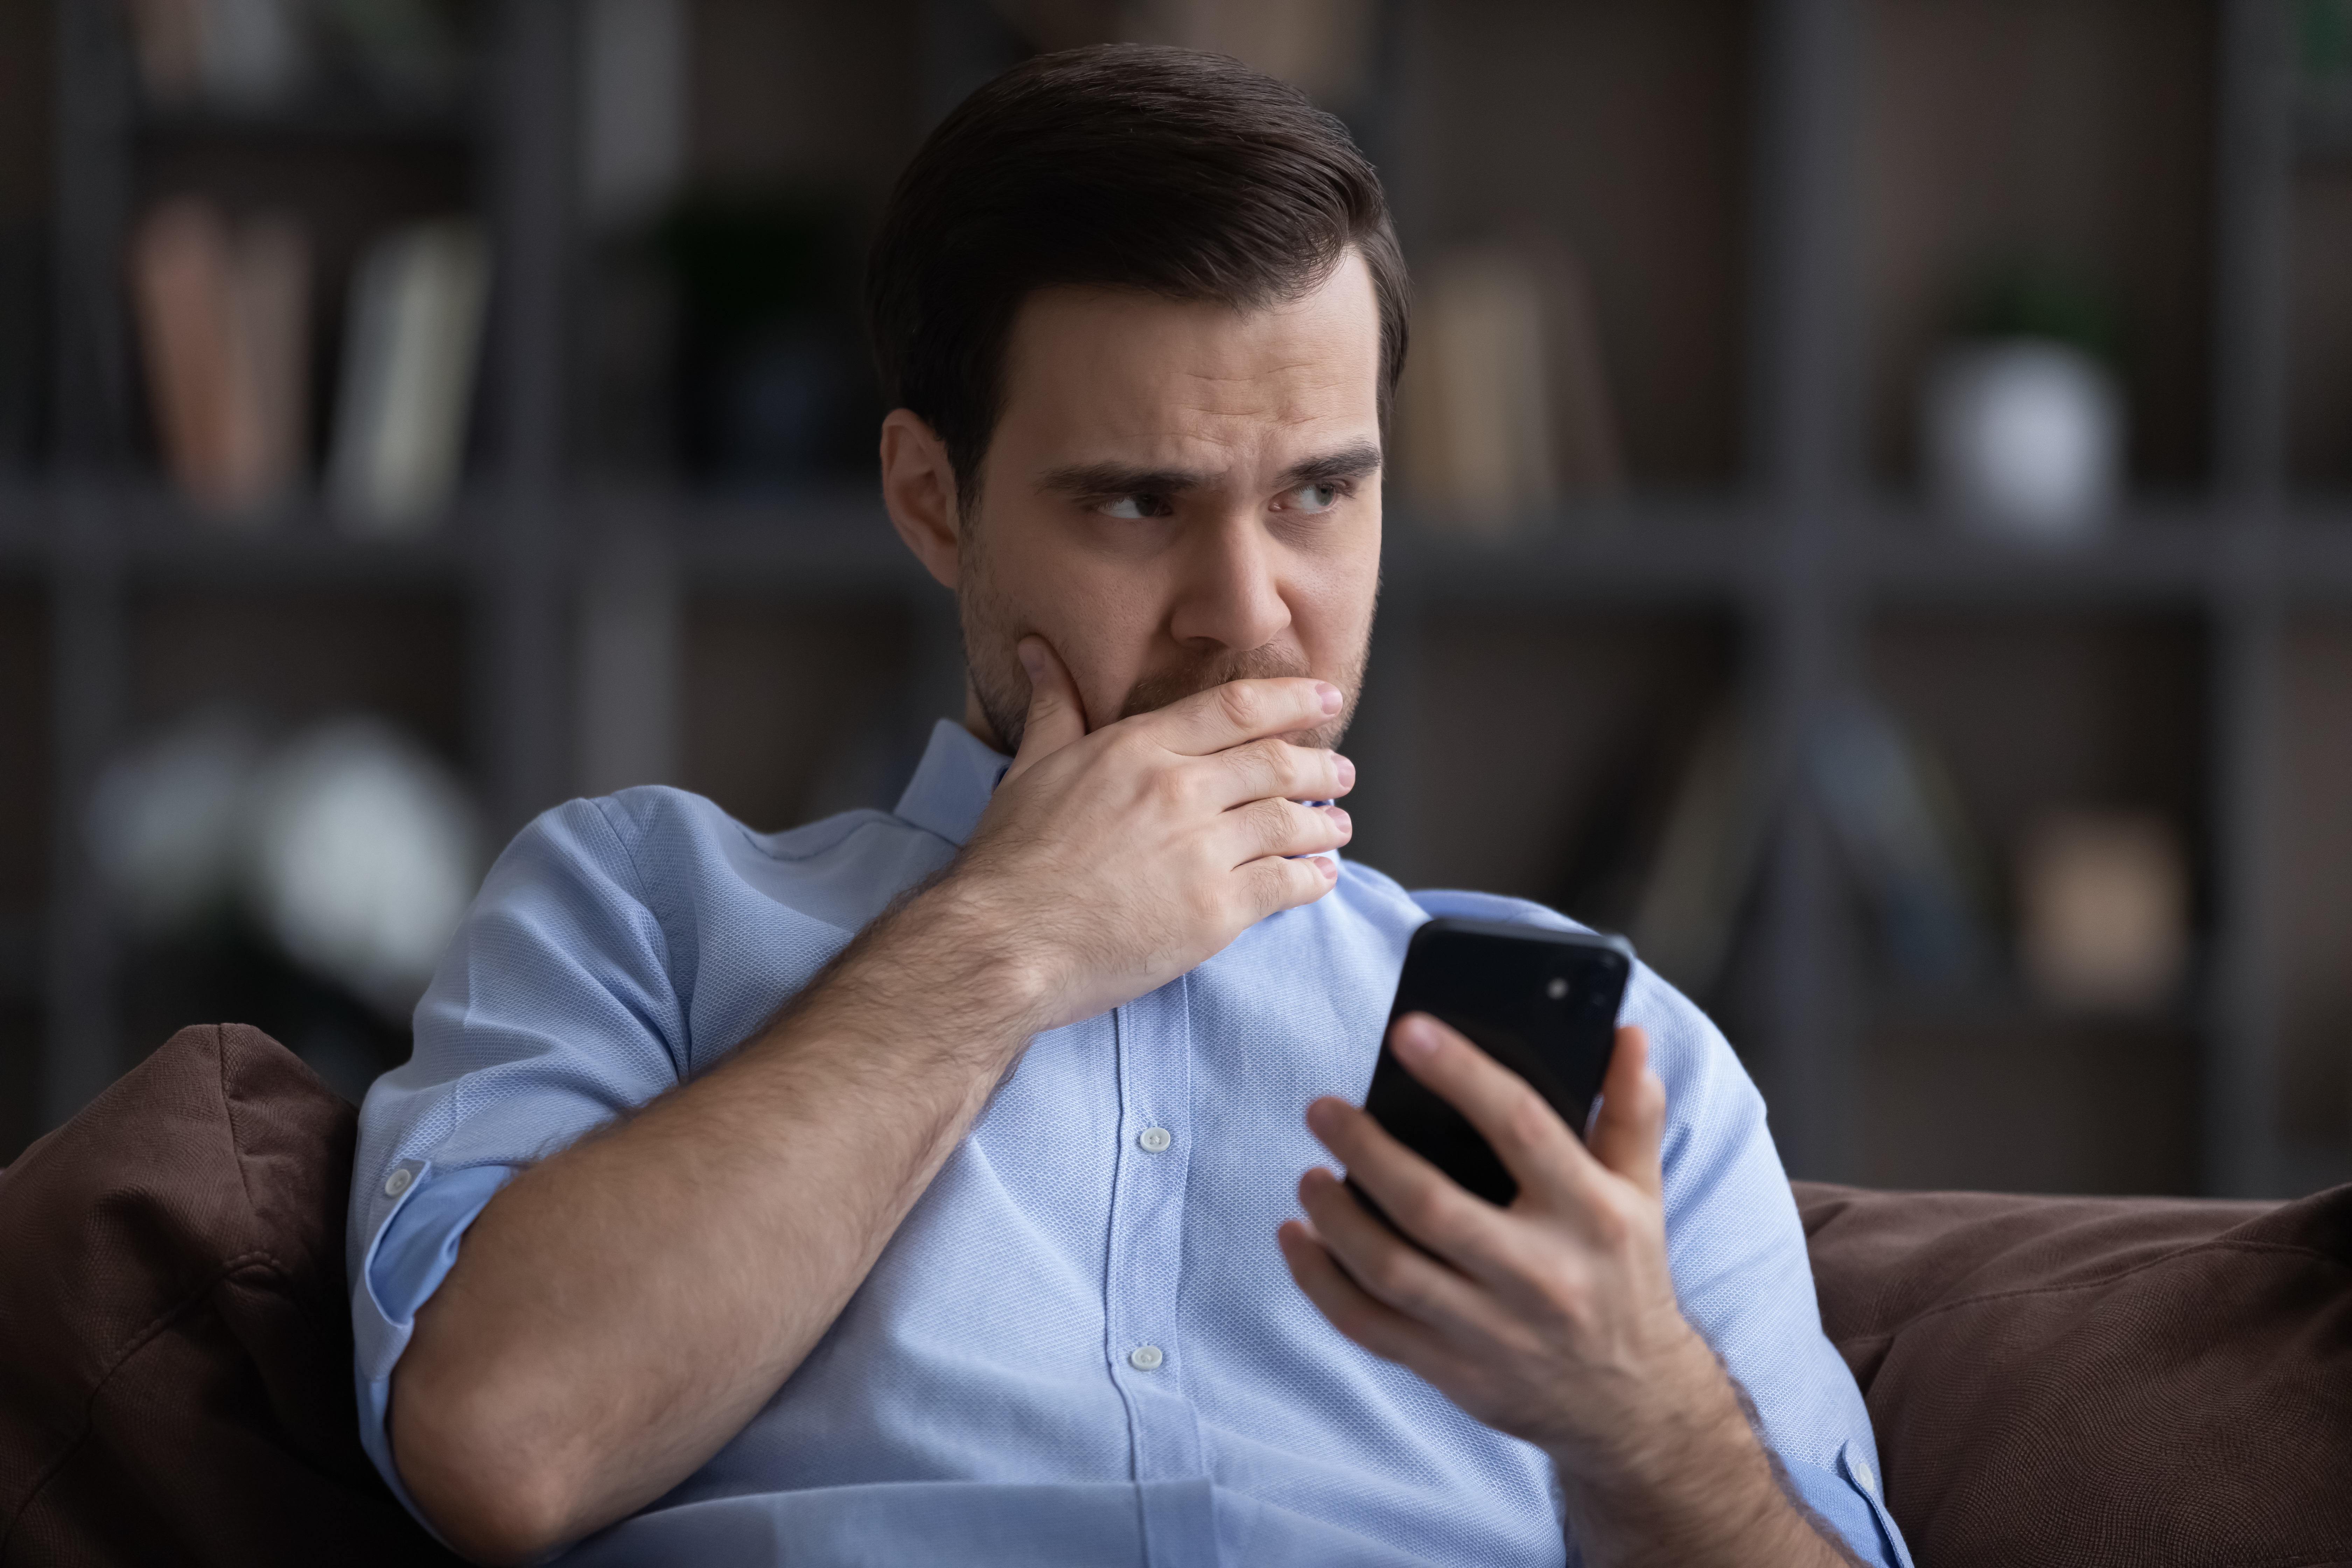 An anxious man thinking while holding his phone | Source: Shutterstock